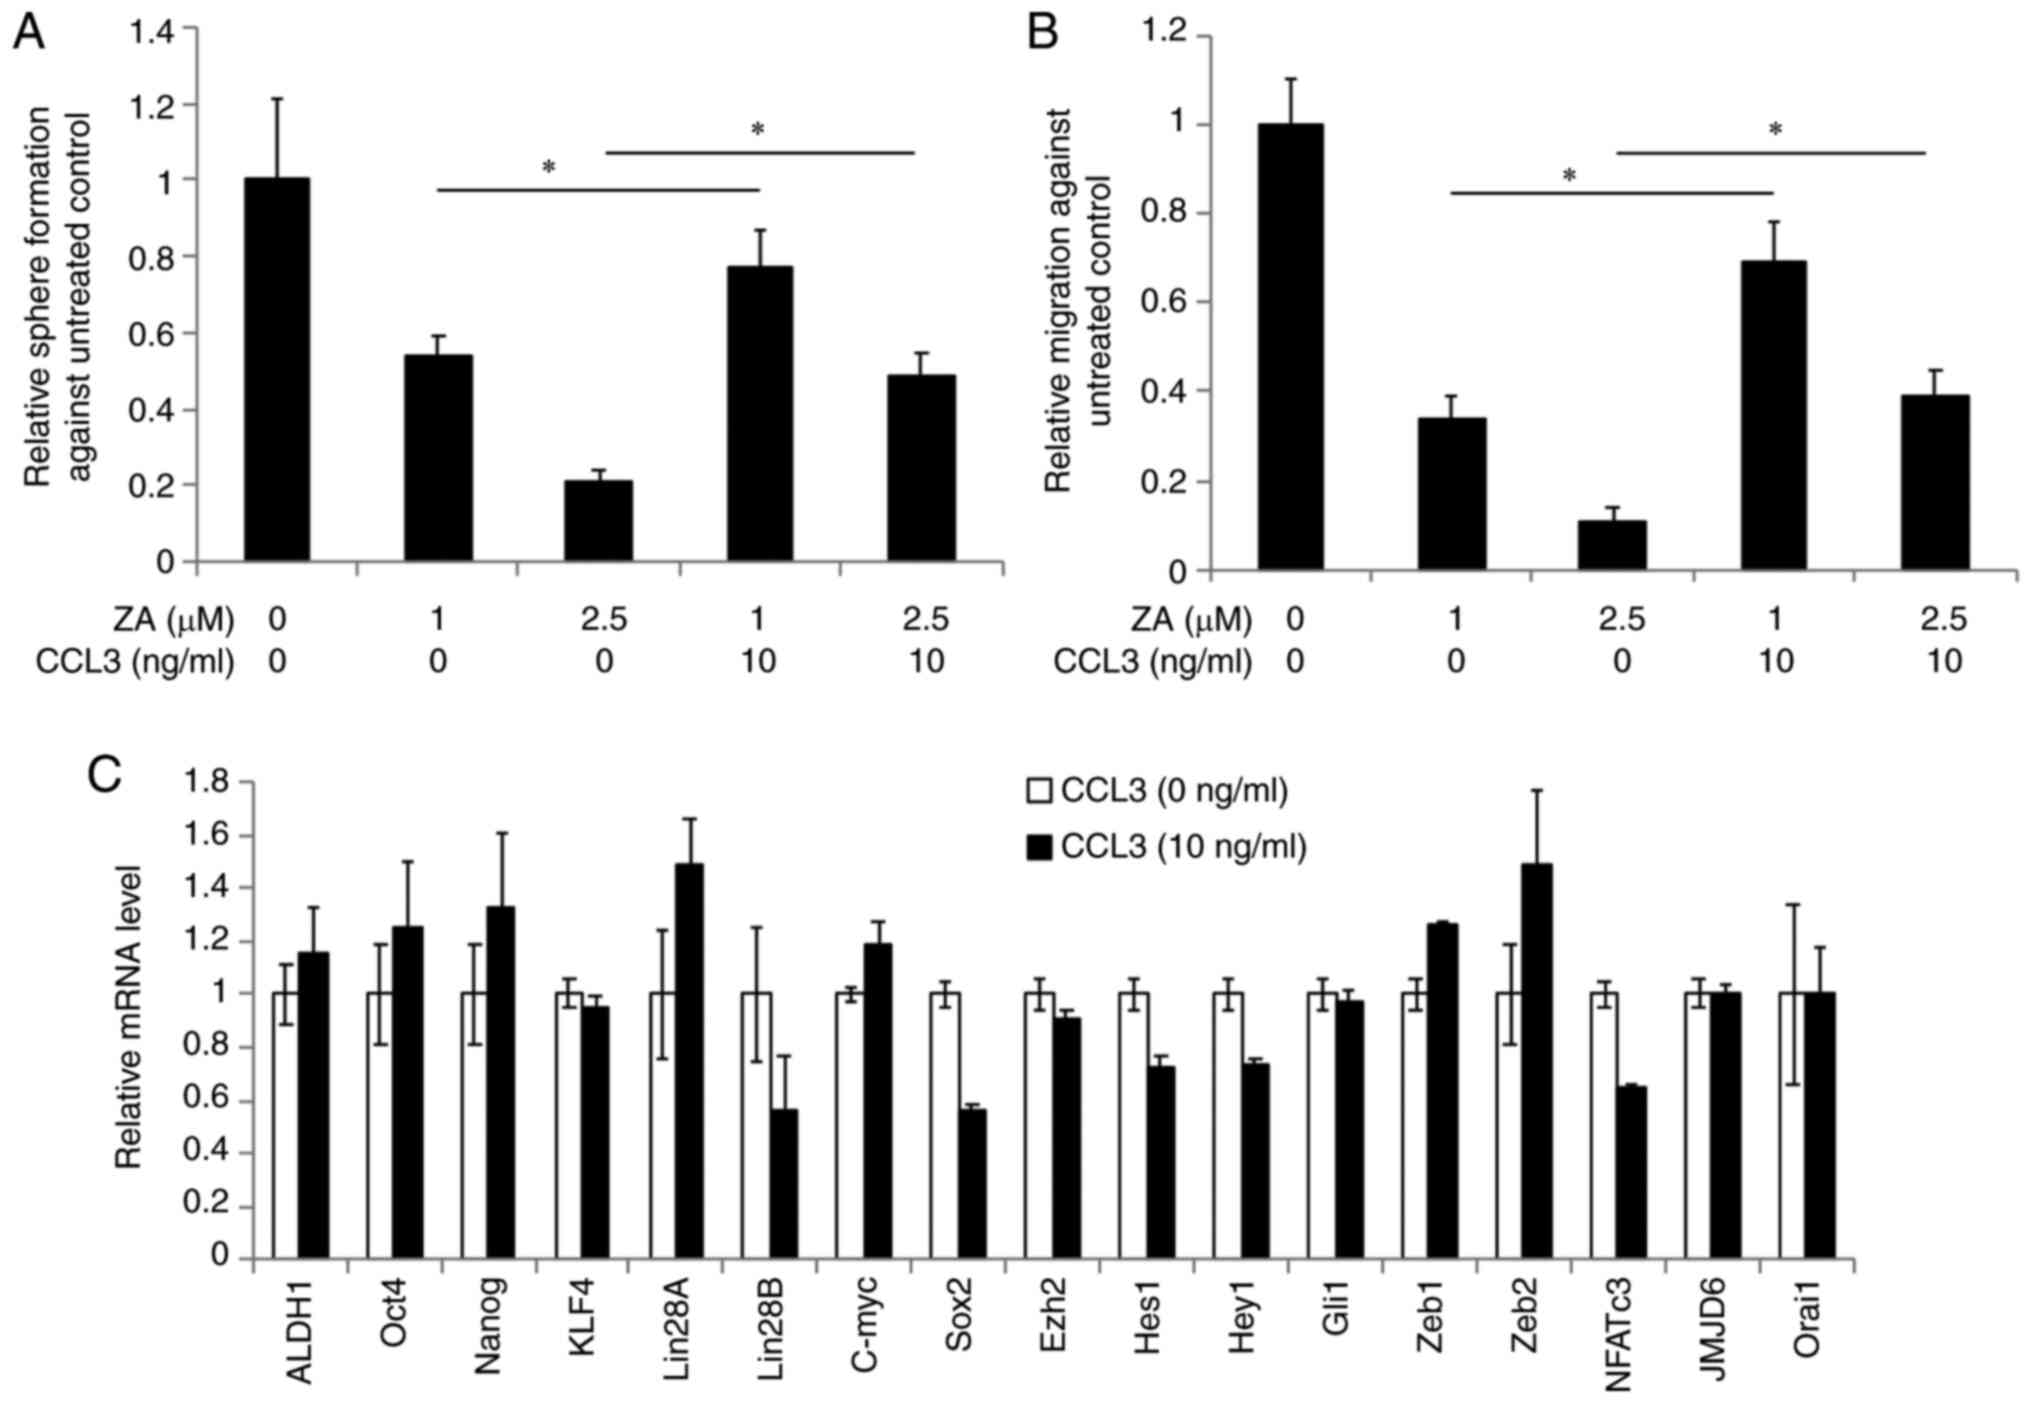 Zoledronic acid impairs oral cancer stem cells by reducing CCL3